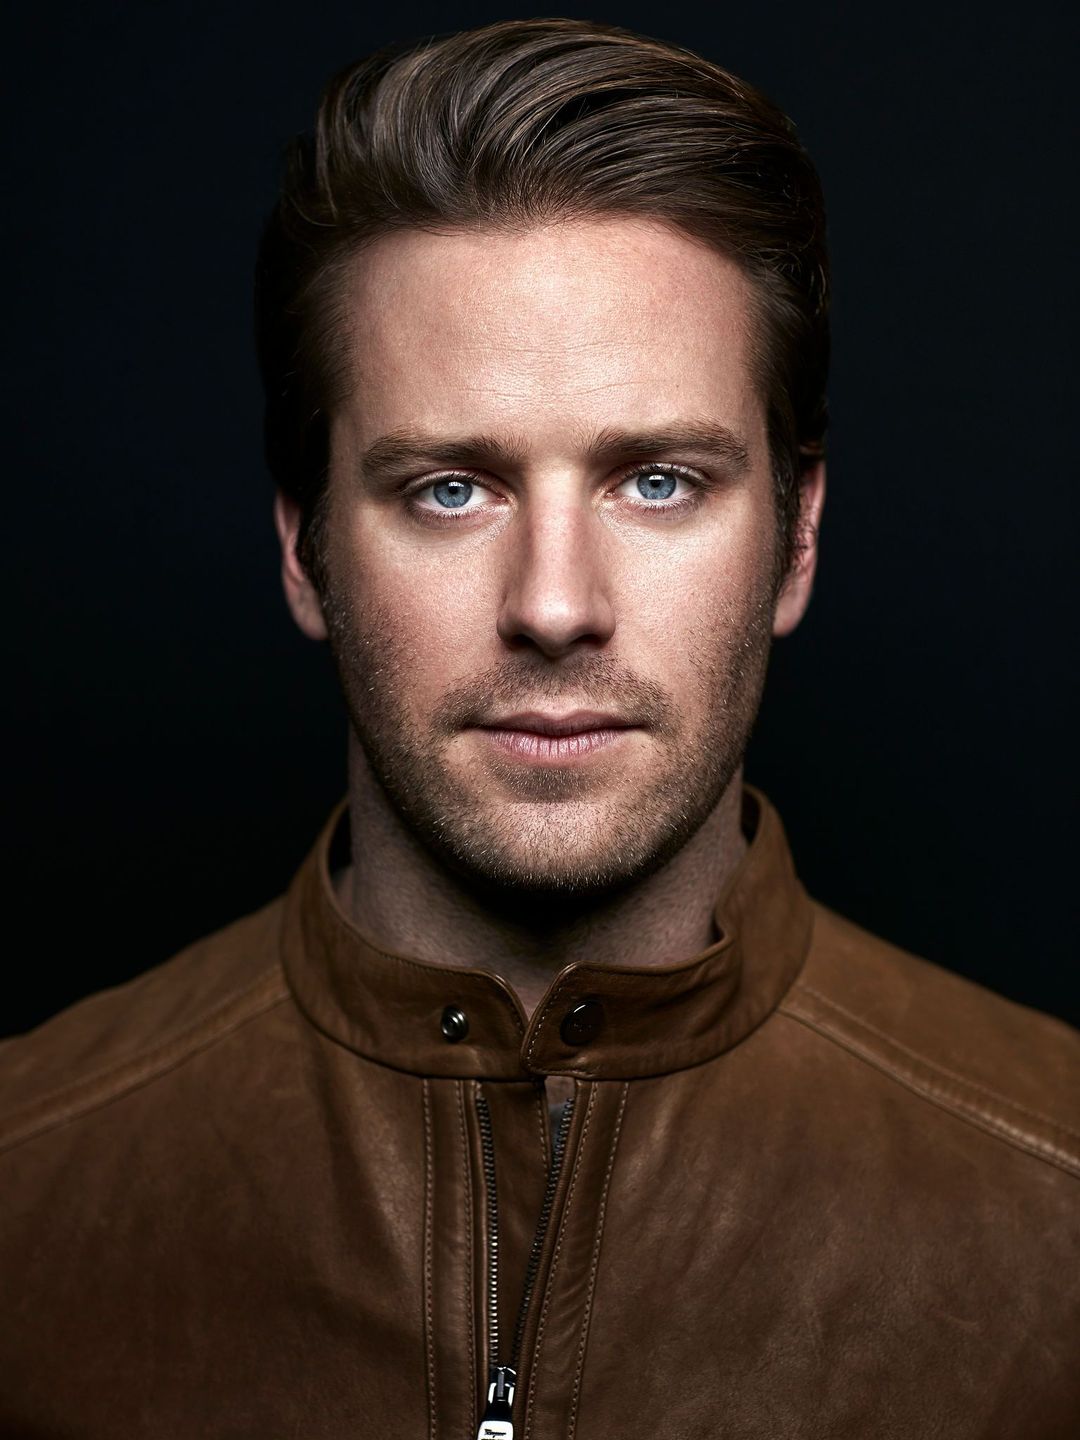 Armie Hammer does he have kids